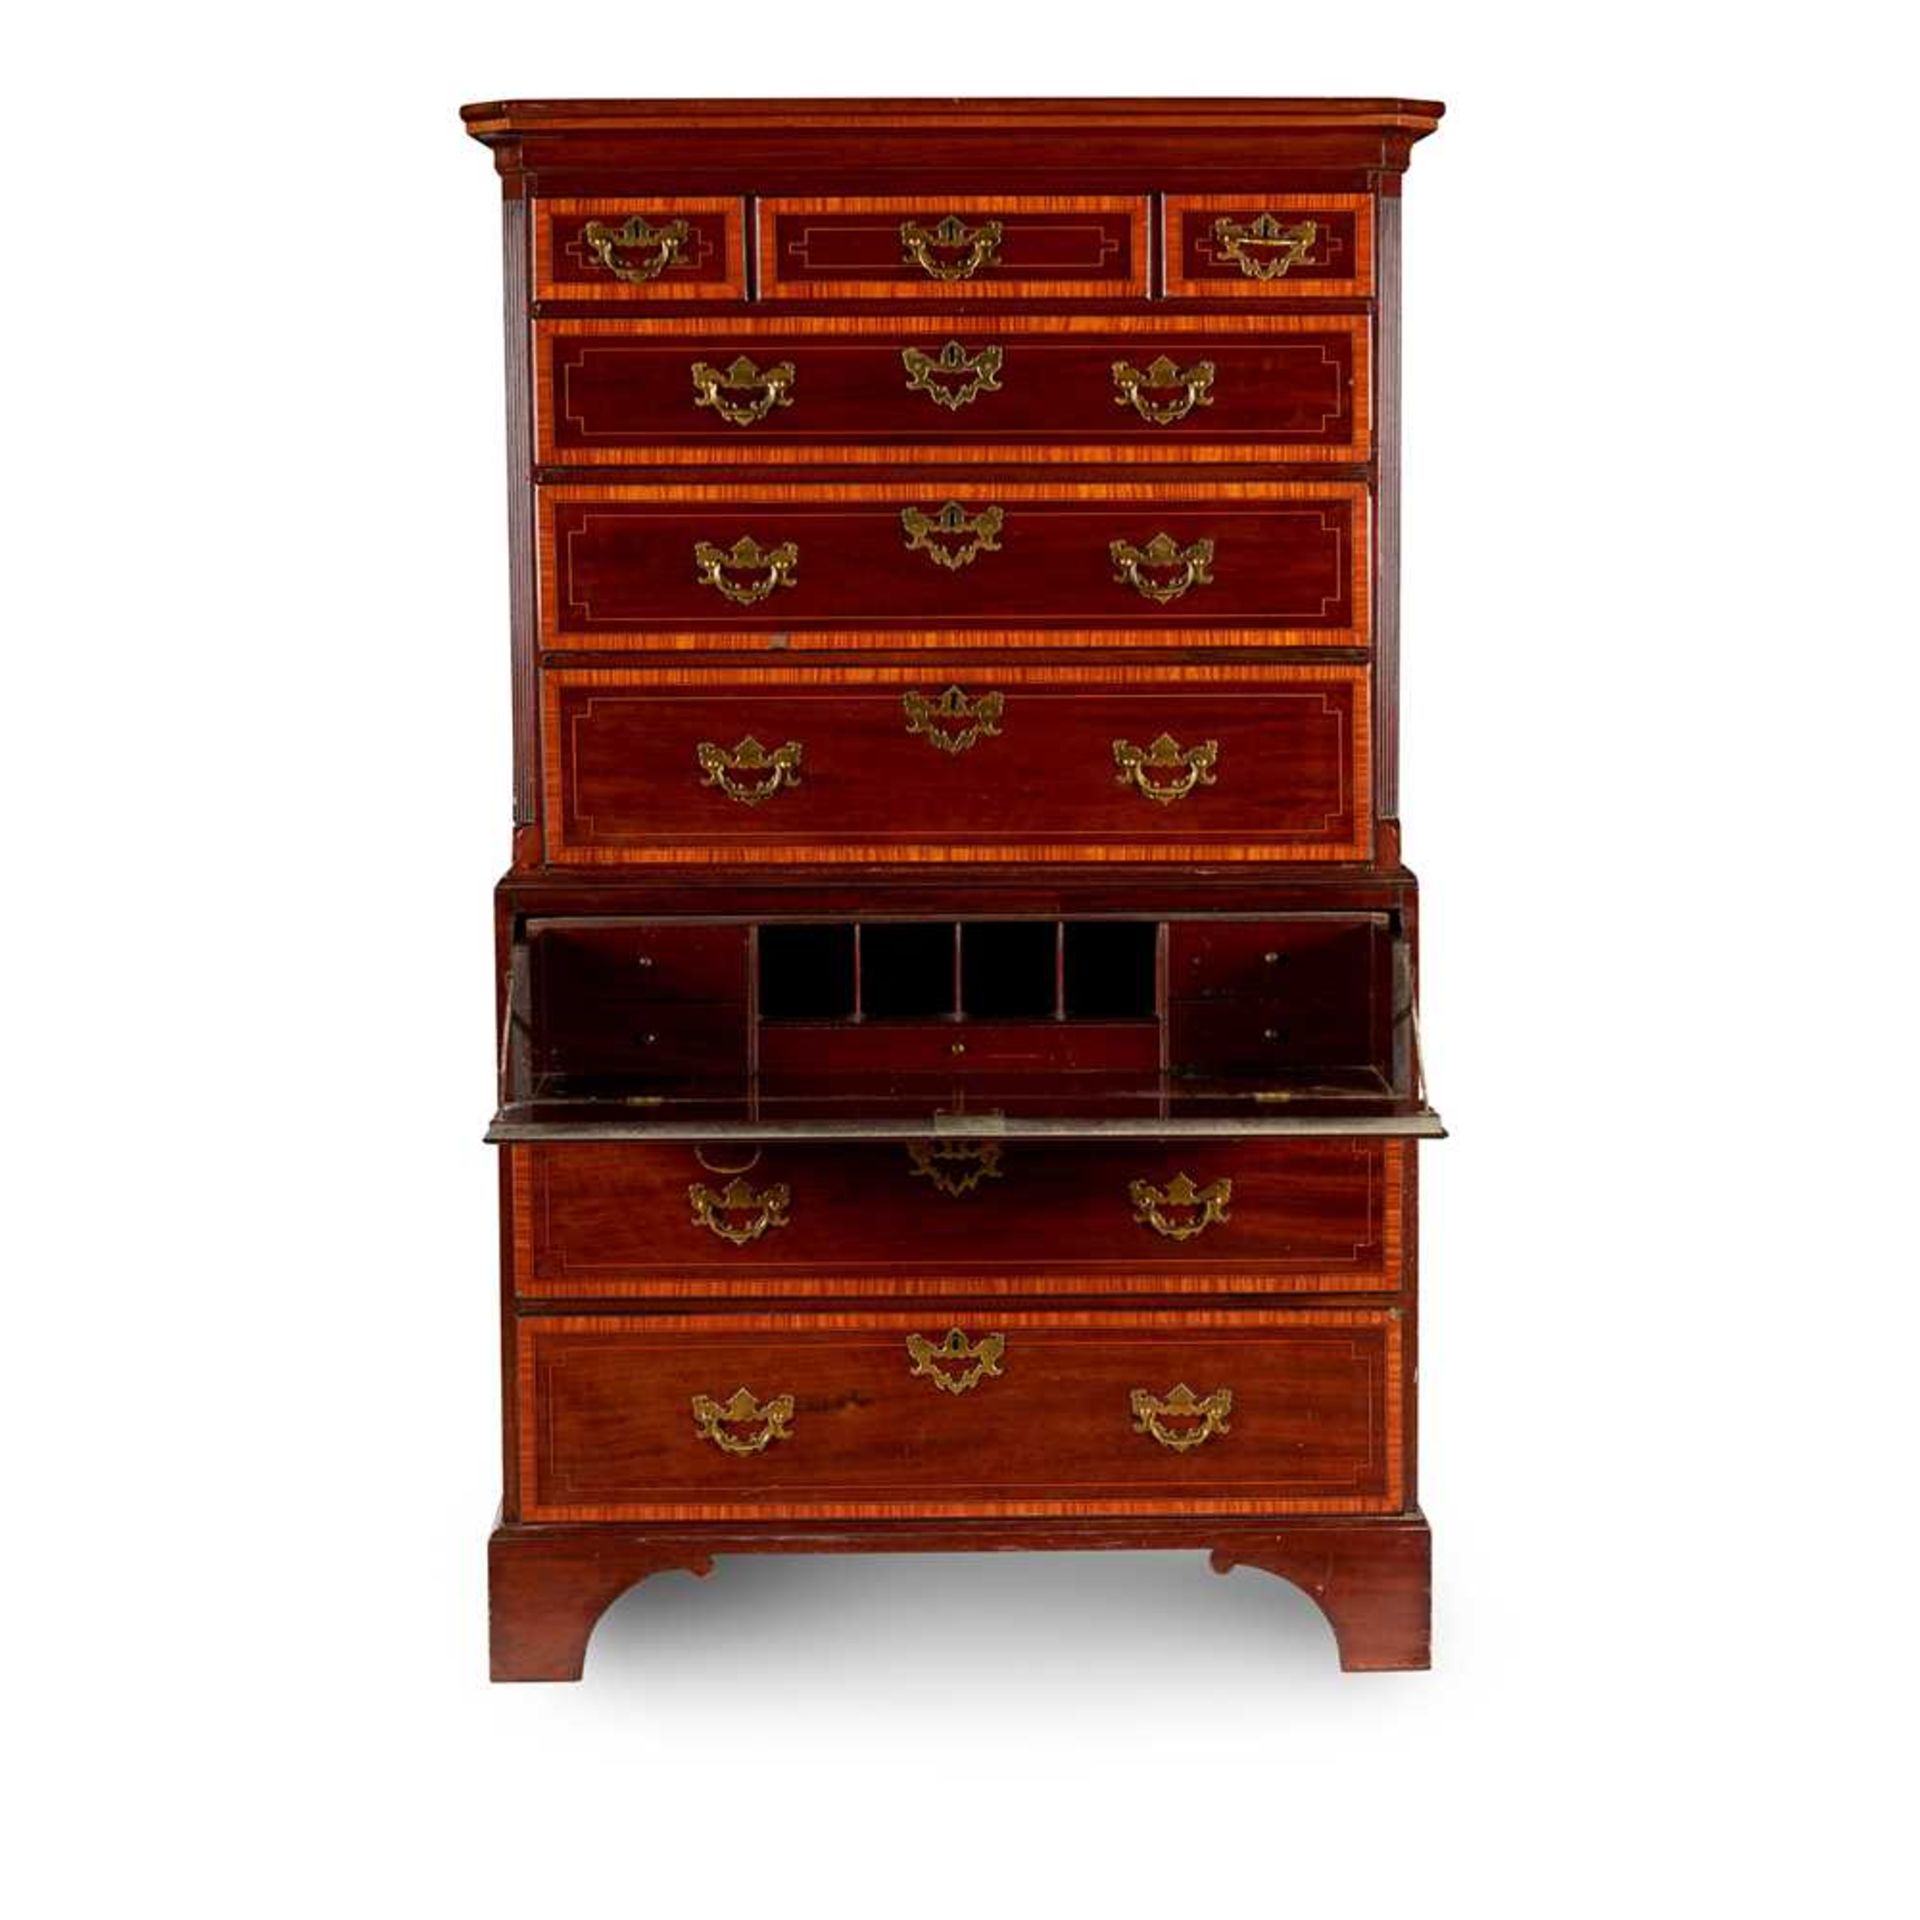 LATE GEORGE III MAHOGANY AND SATINWOOD CROSSBANDED CHEST-ON-CHEST LATE 18TH CENTURY - Image 2 of 3